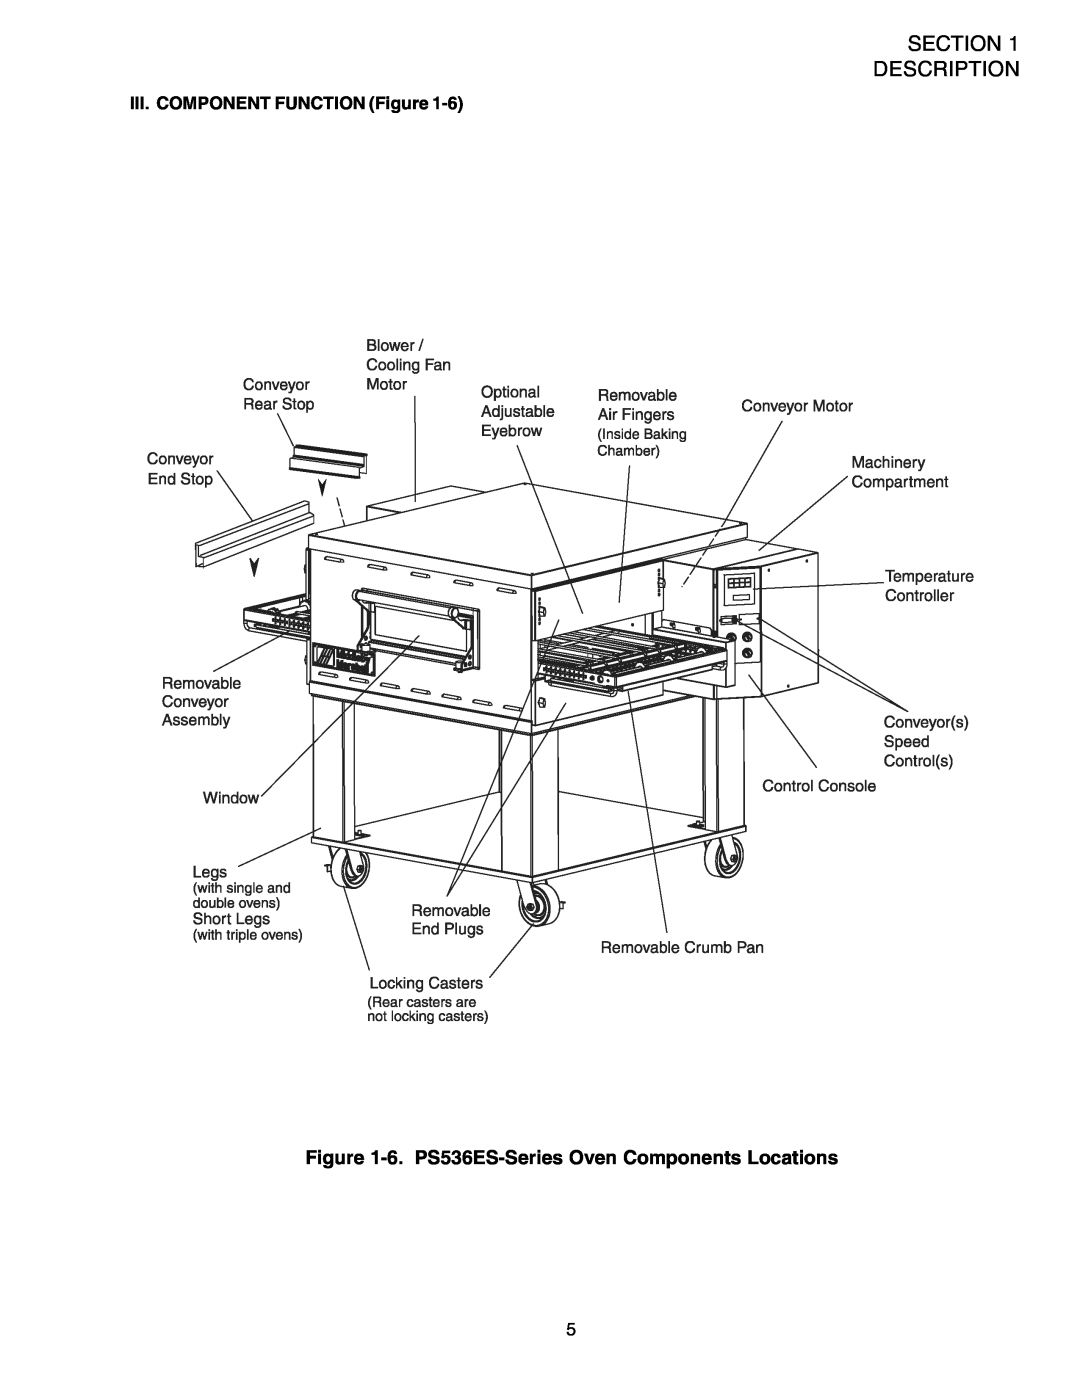 Middleby Marshall installation manual 6. PS536ES-Series Oven Components Locations, III. COMPONENT FUNCTION Figure 